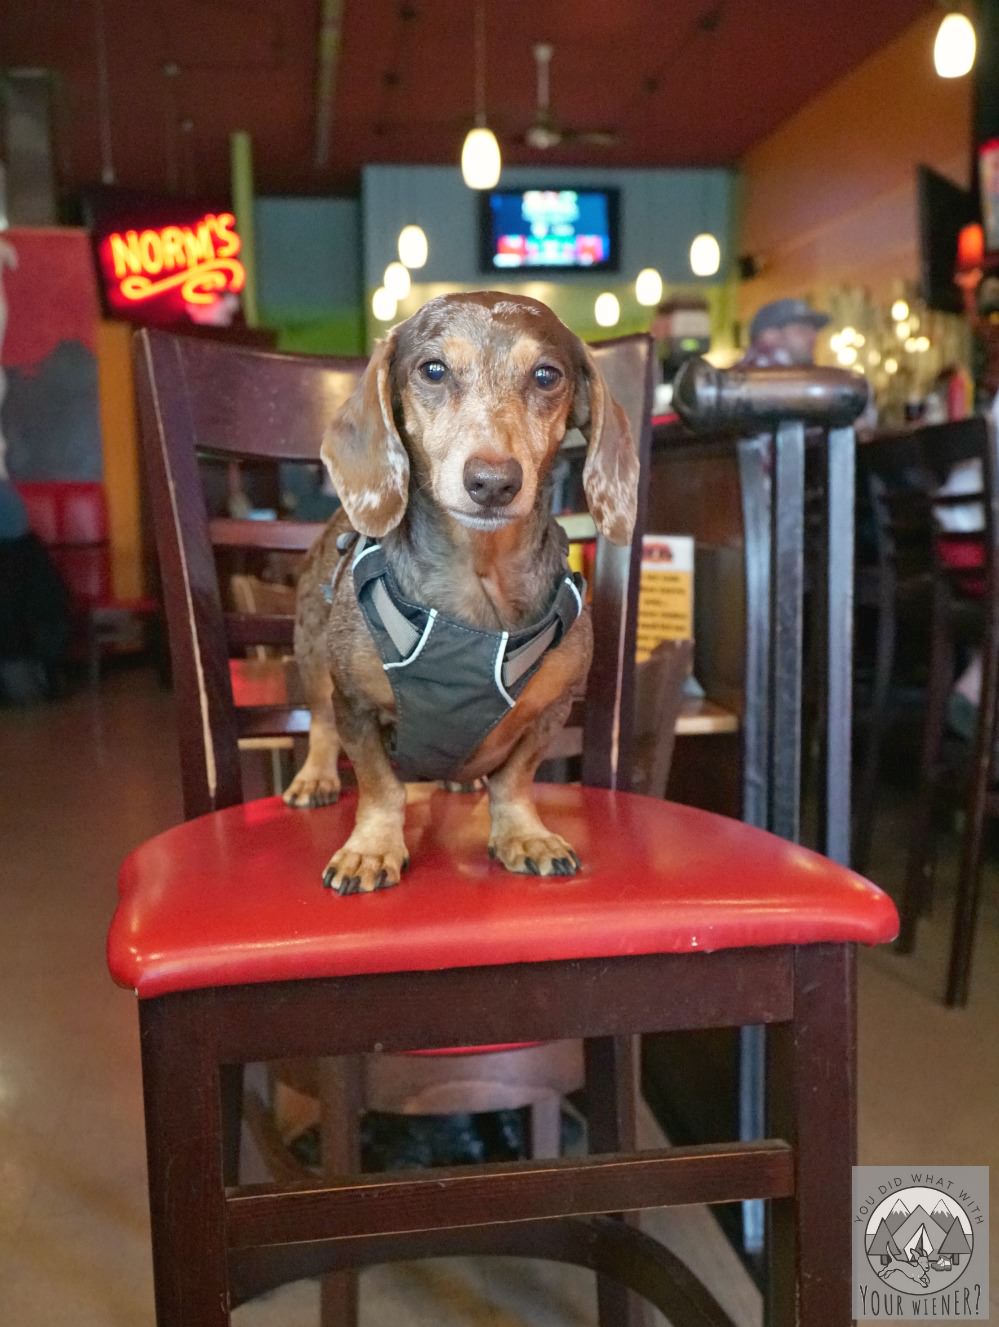 You Must Follow These Rules if You Bring Your Dog to a Dog Friendly Restaurant